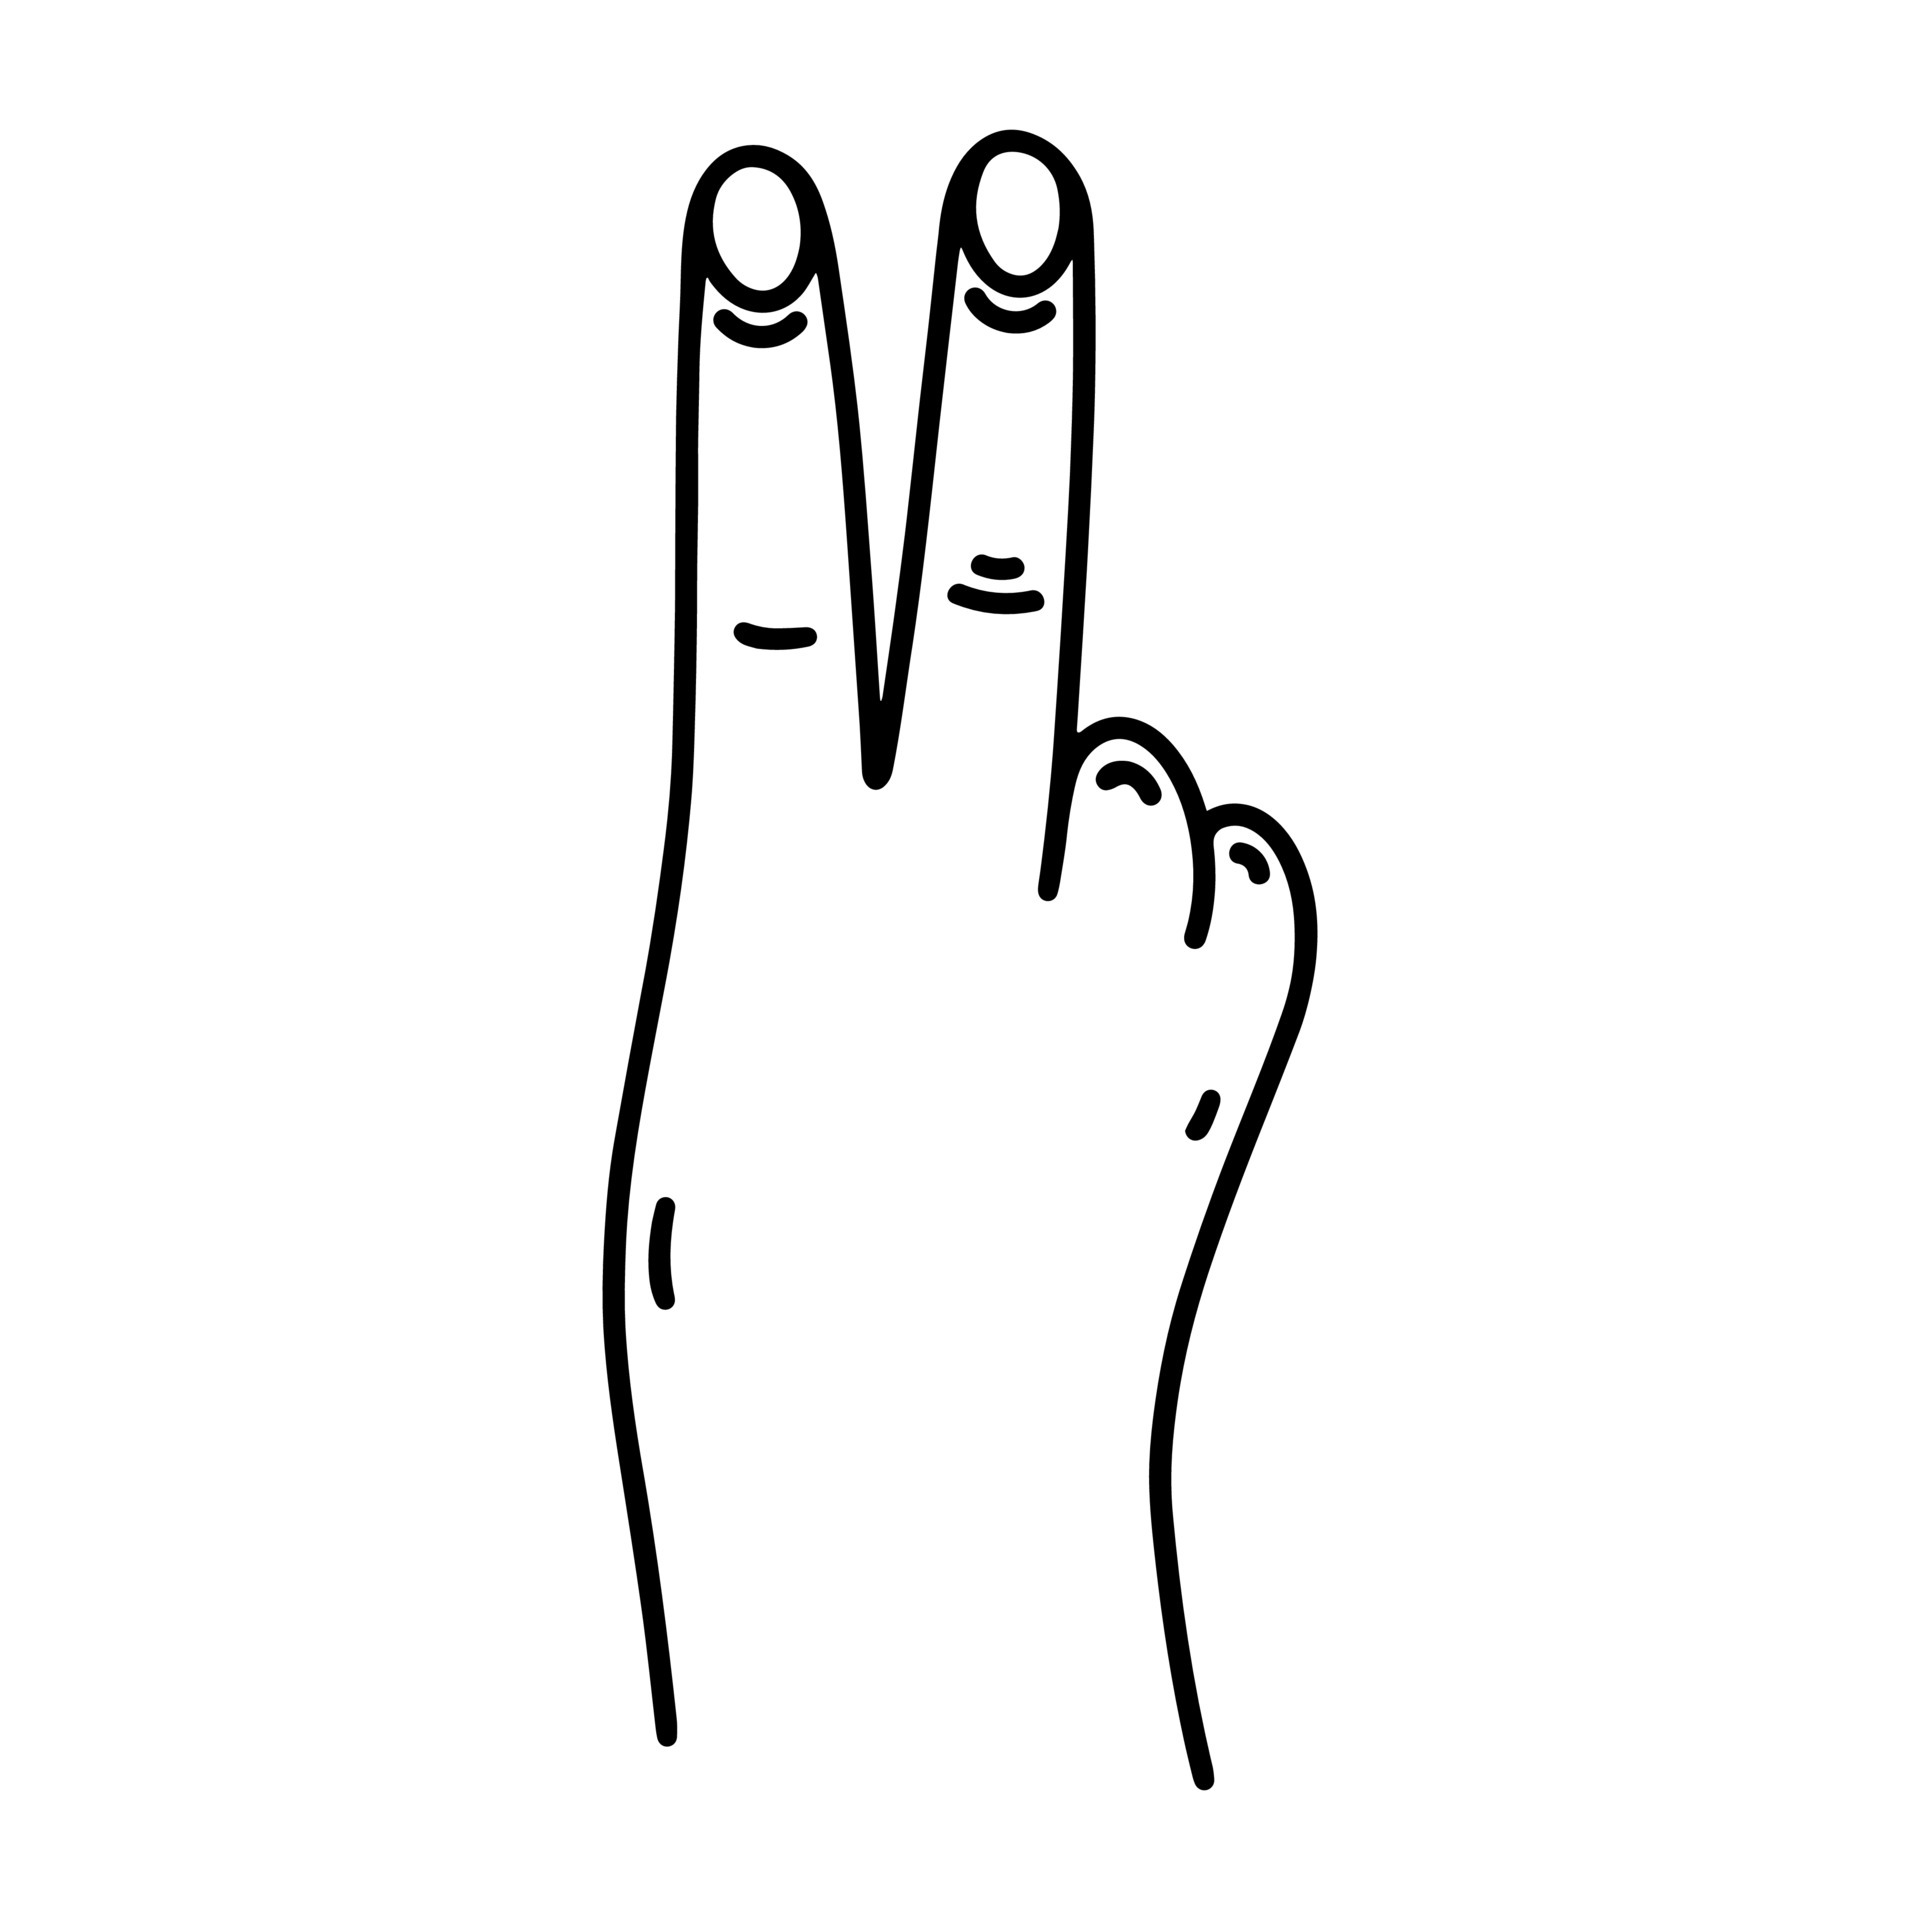 530 Middle Finger Drawings Stock Photos Pictures  RoyaltyFree Images   iStock